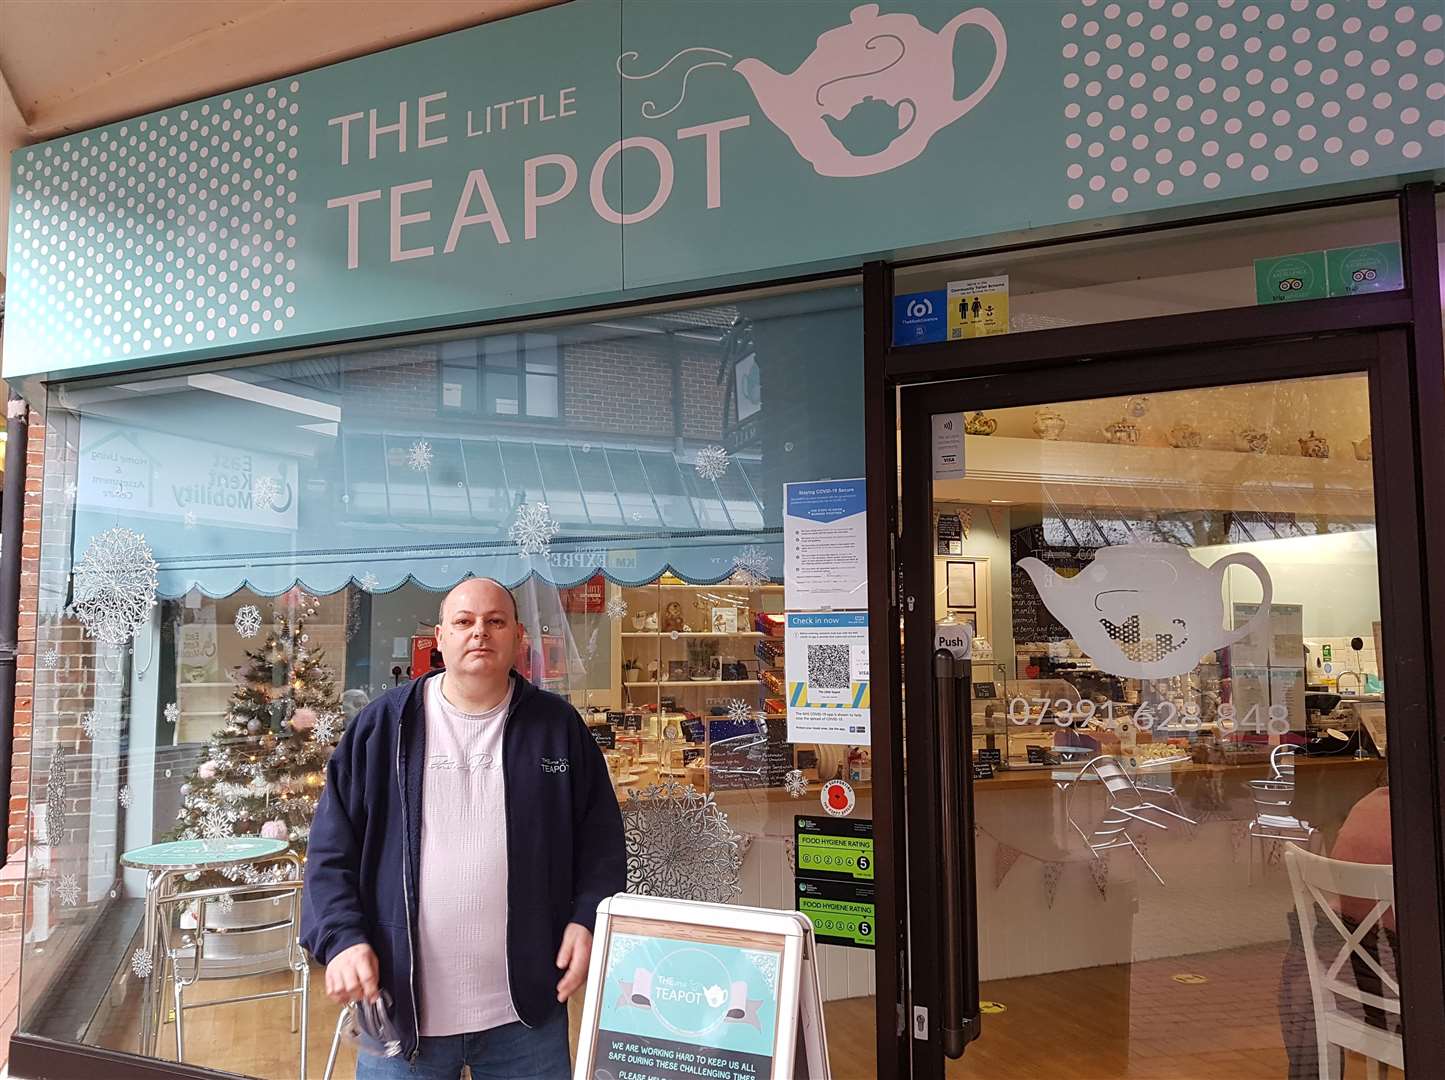 Russell Geen, owner of The Little Teapot in Park Mall, is looking forward to expanding his business